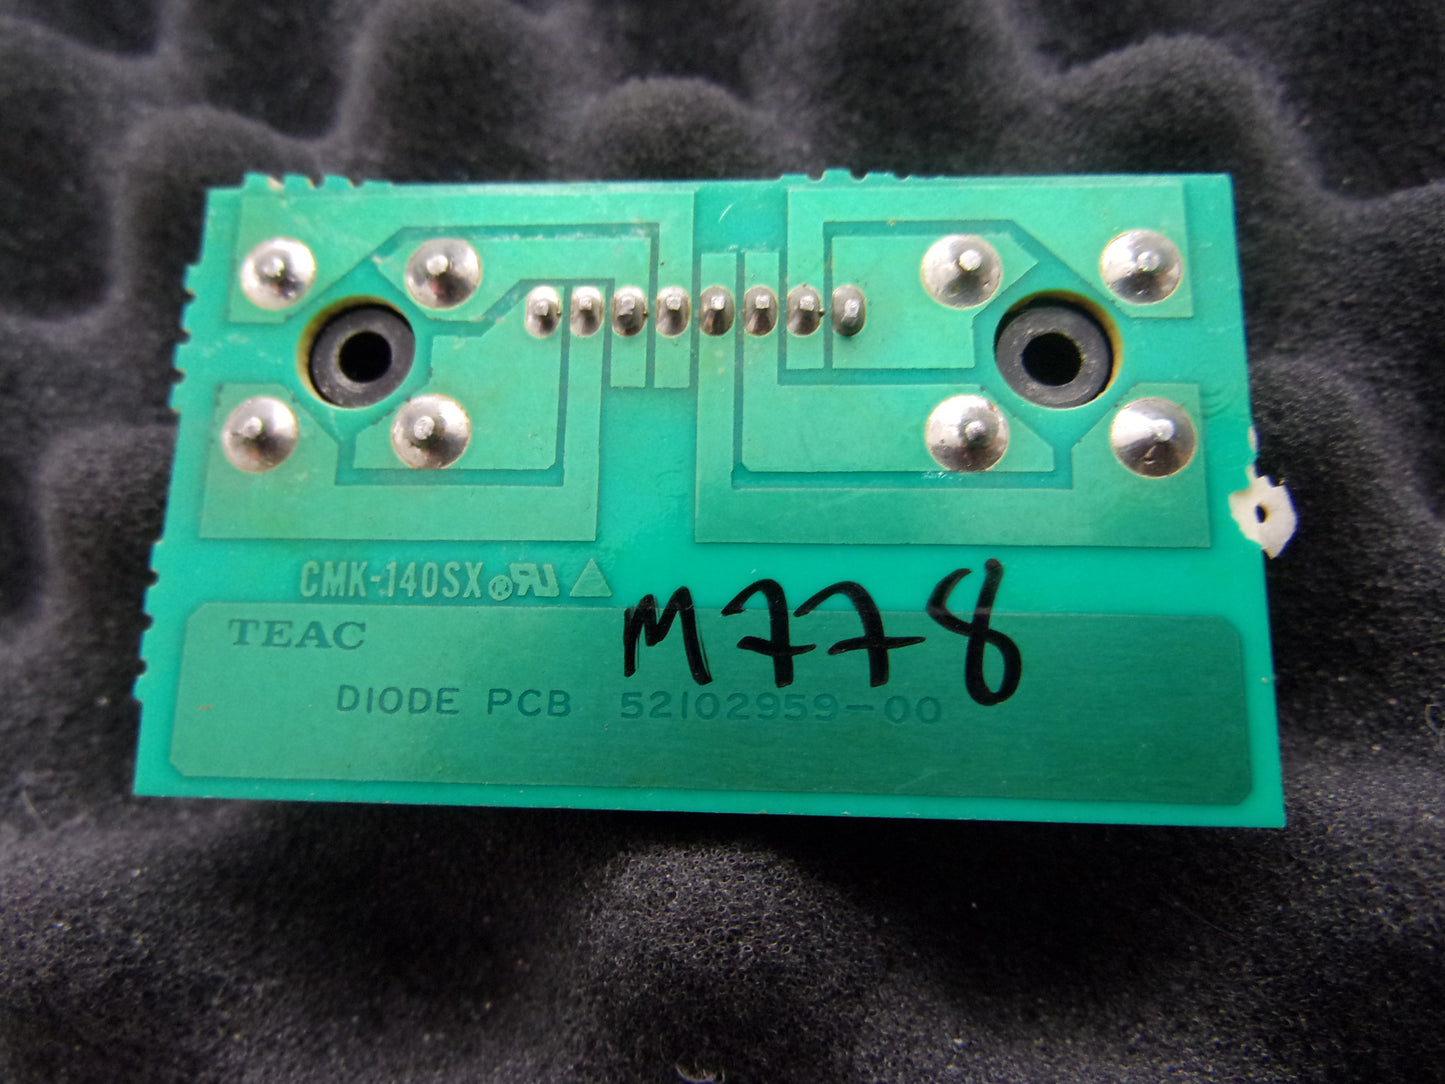 Tascam 688 diode pcb 52102959-00